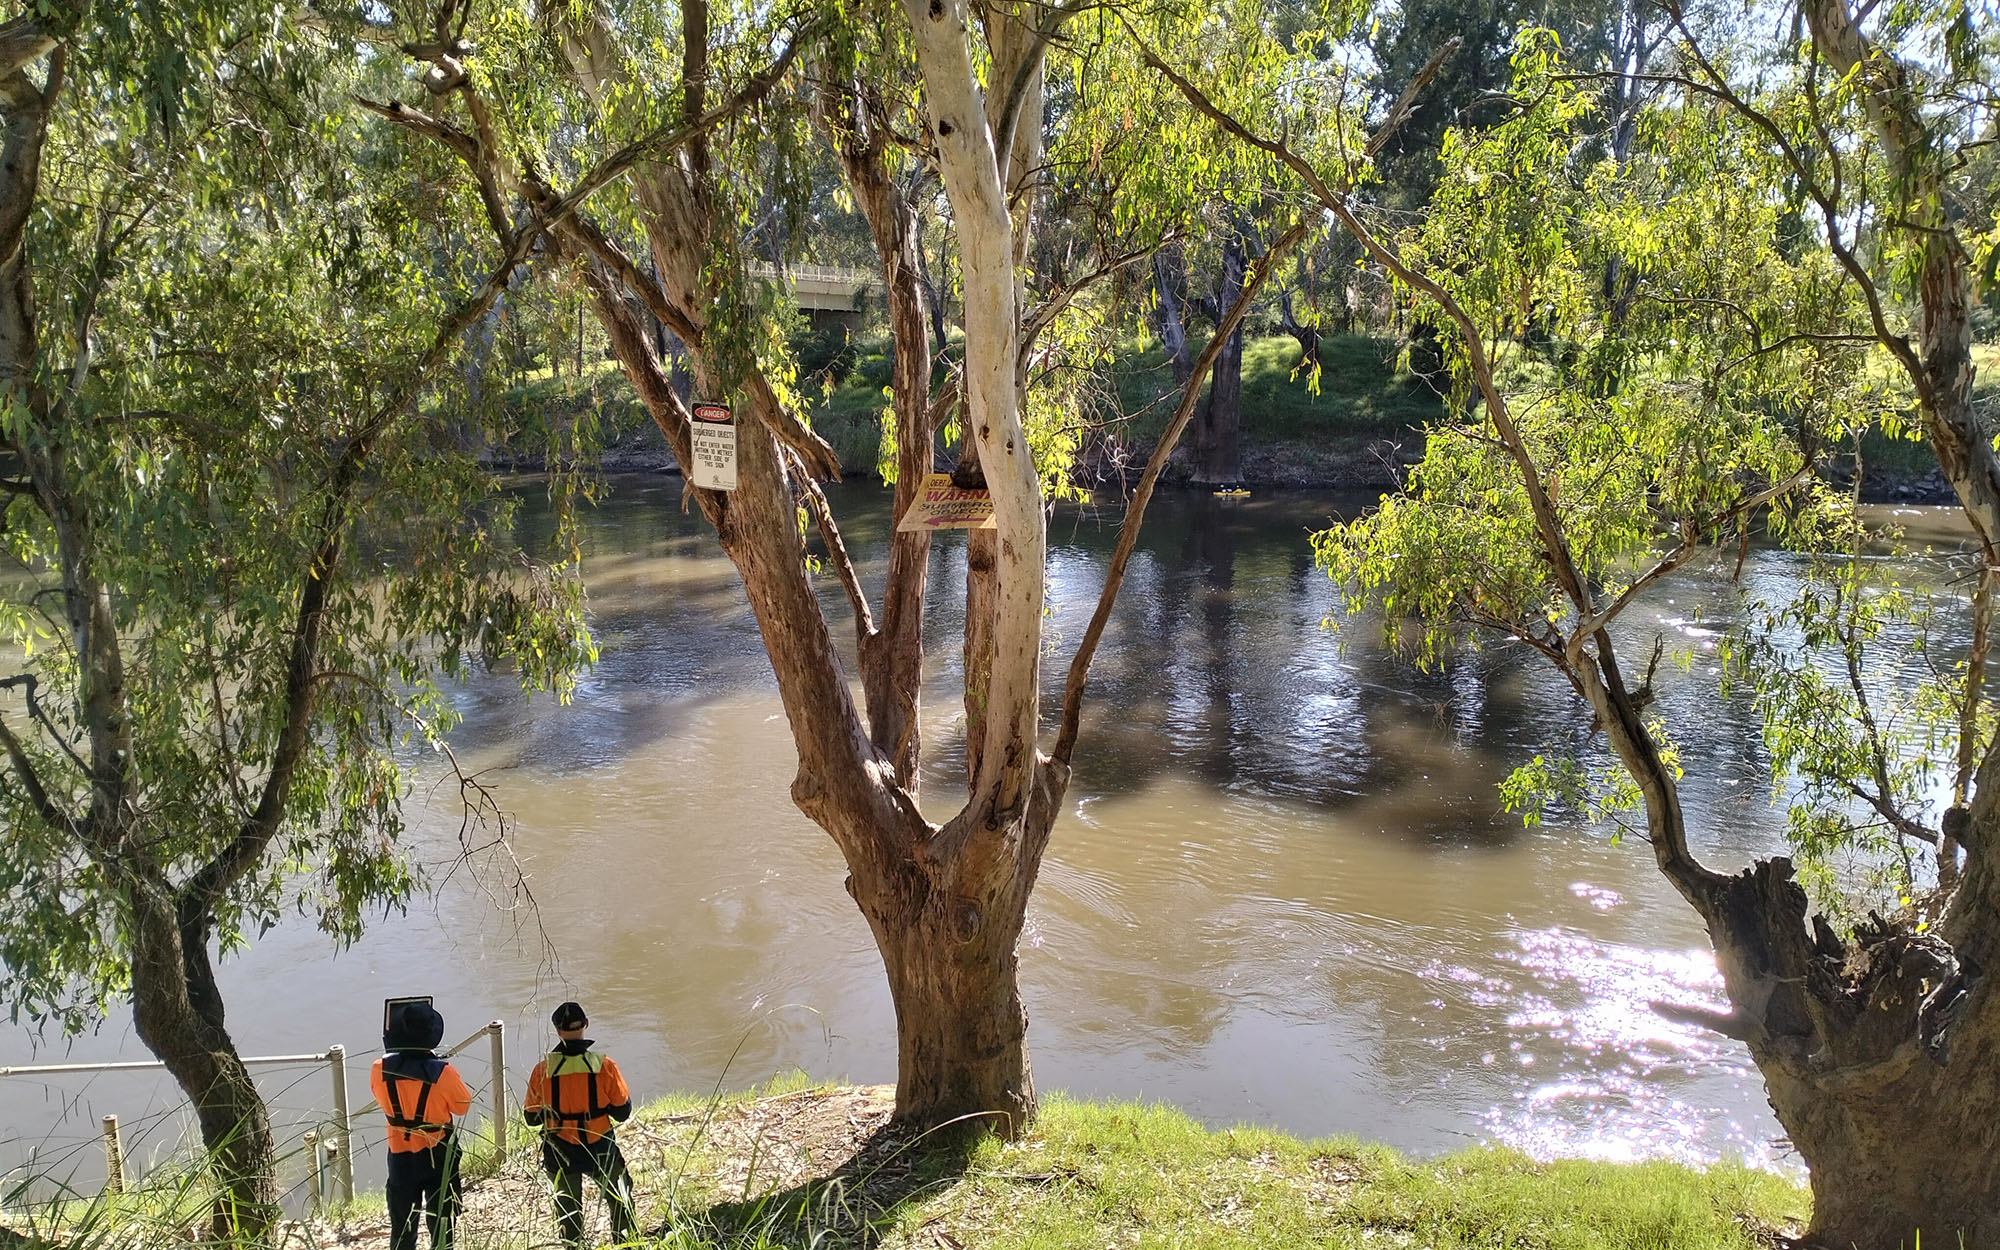 Two men in high vis watching the river with gum trees. Image credit: Siv Teh DPE 